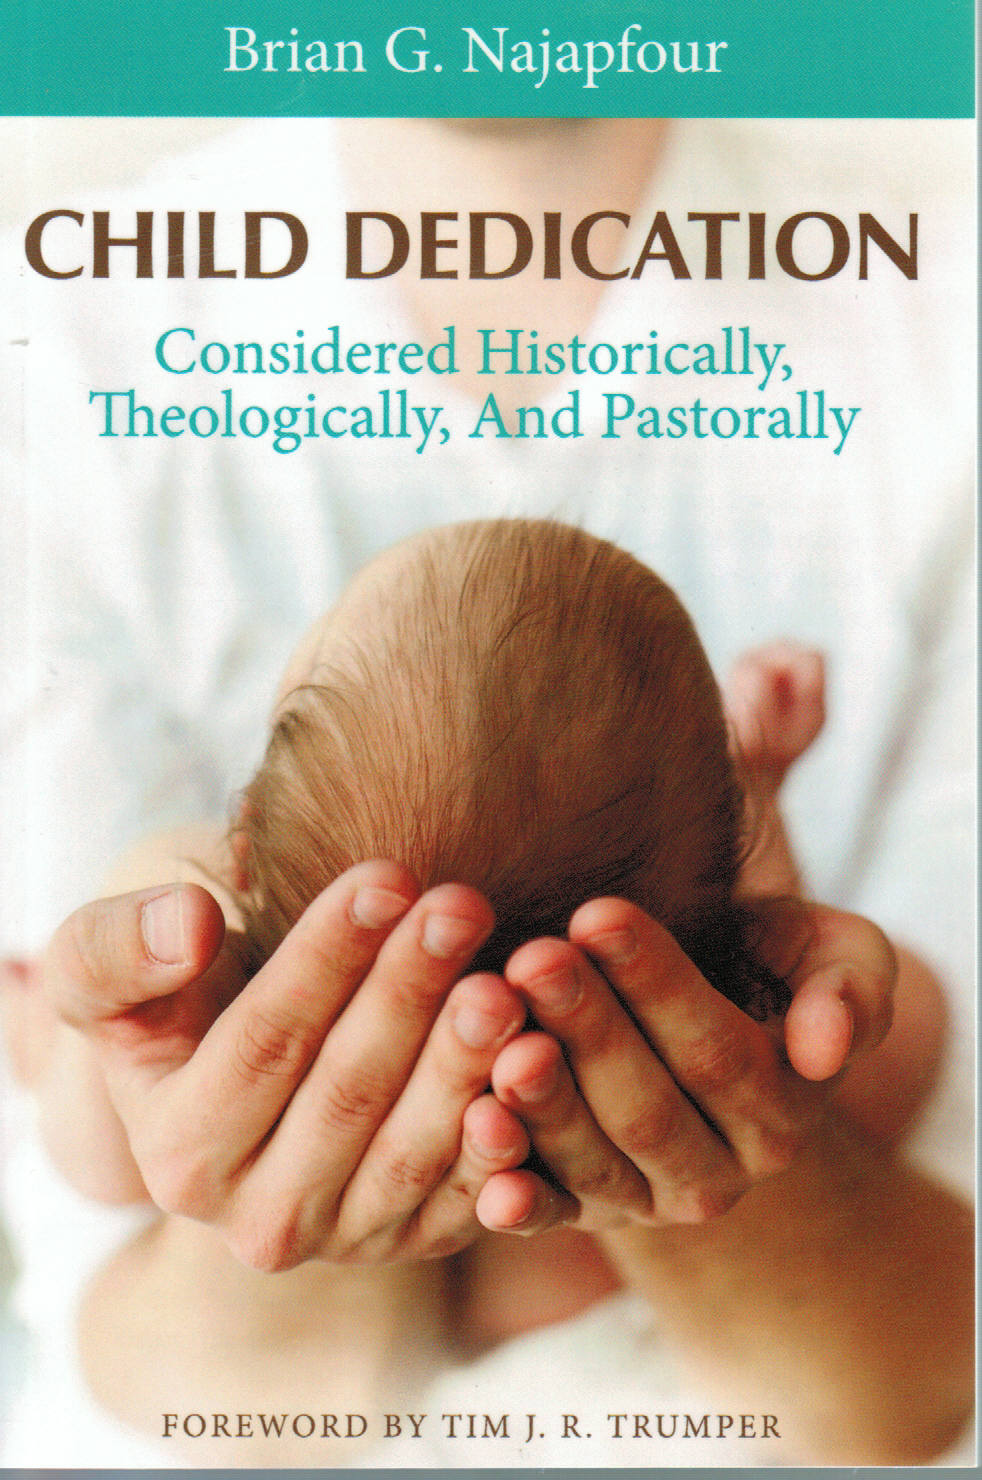 Child Dedication: Considered Historically, Theologically, and Pastorally